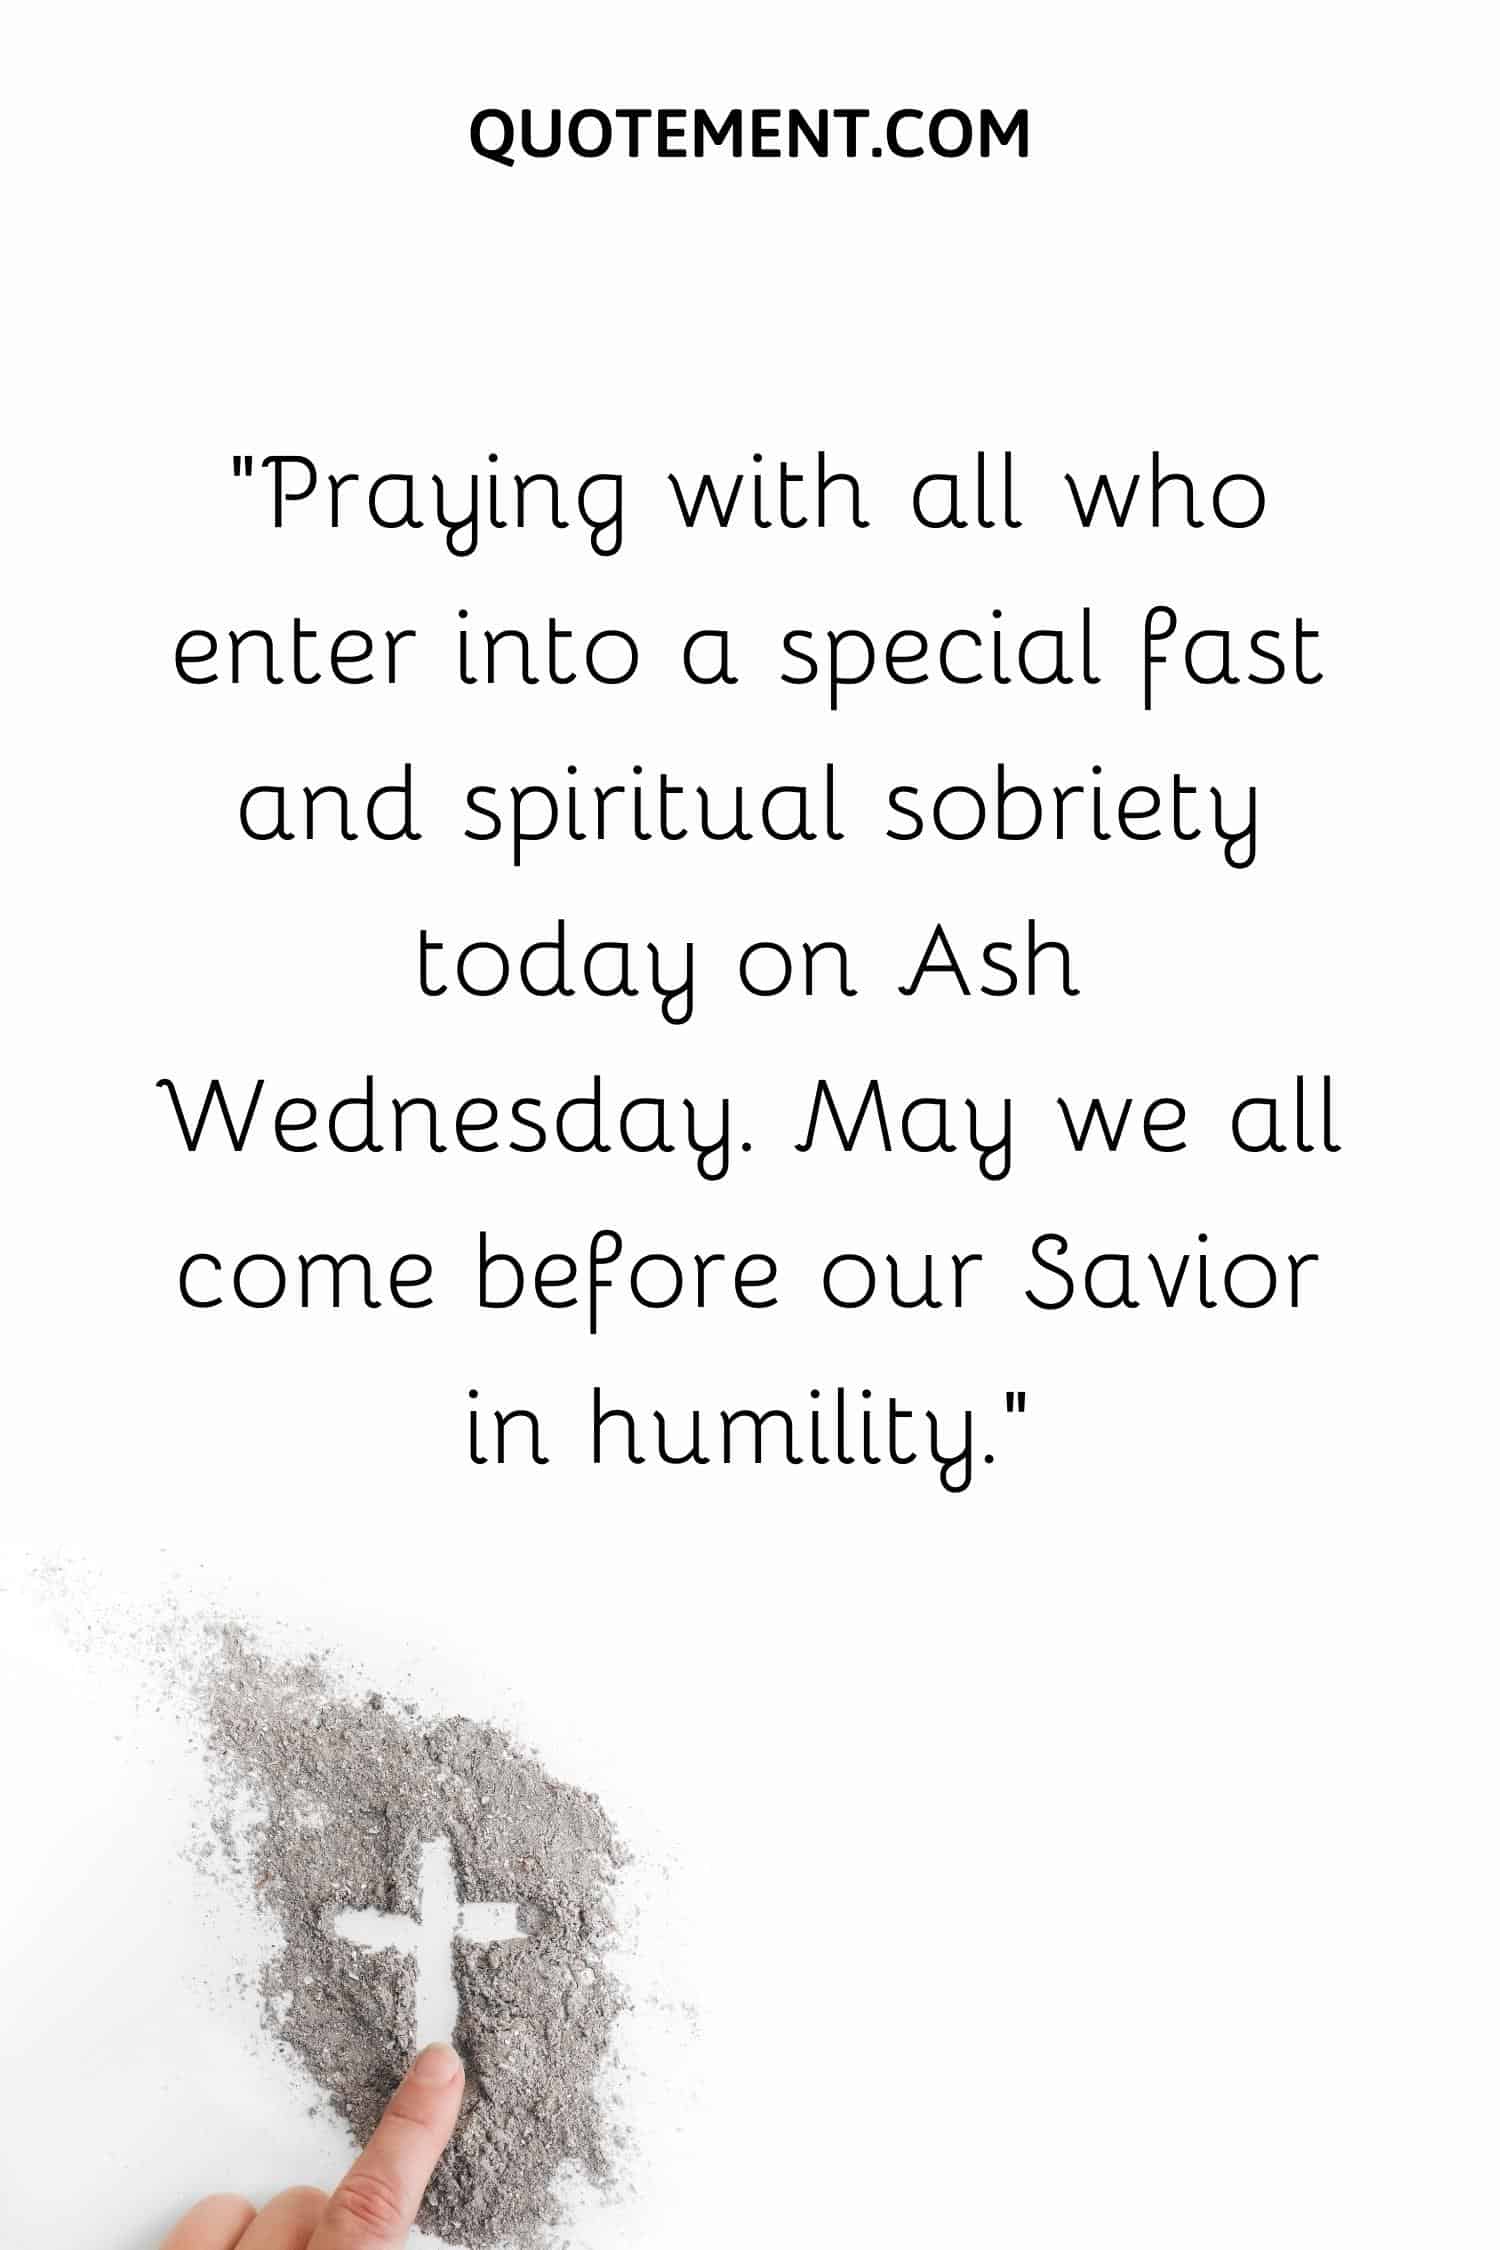 Praying with all who enter into a special fast and spiritual sobriety today on Ash Wednesday